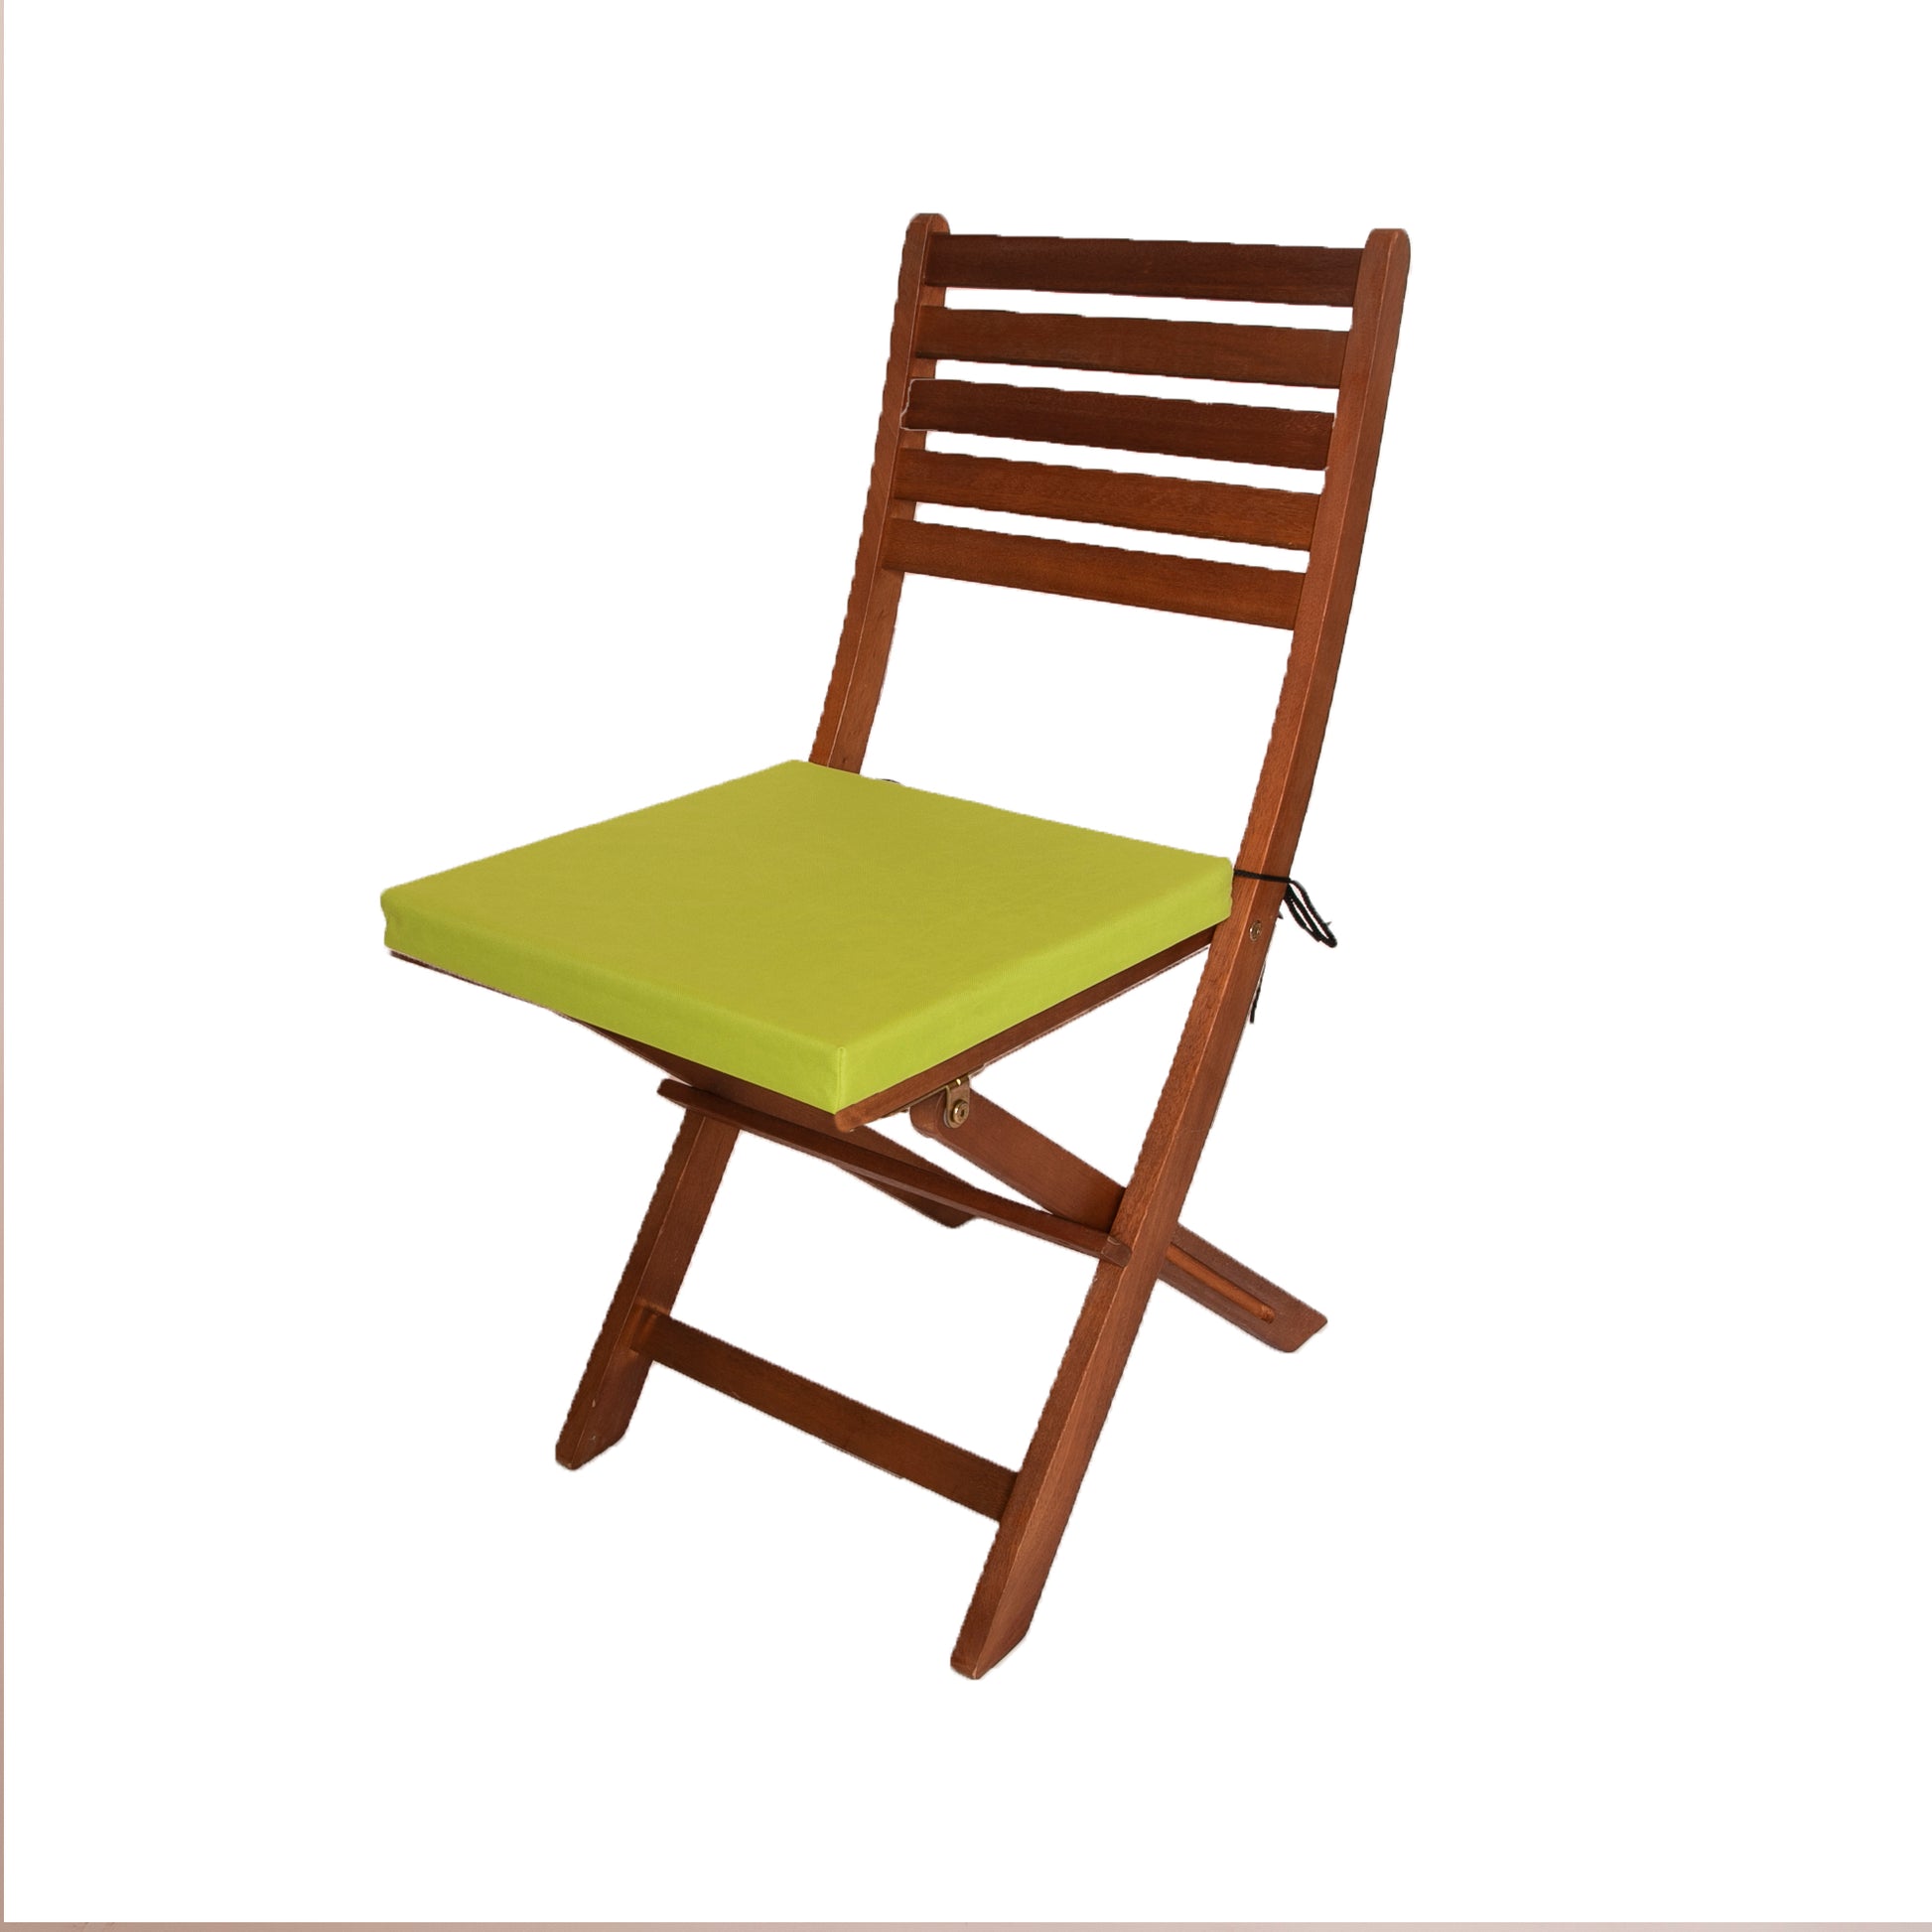 Outdoor Chair Seat Pads Bench Pads Waterproof Garden Chair Seat Pads Lime Green